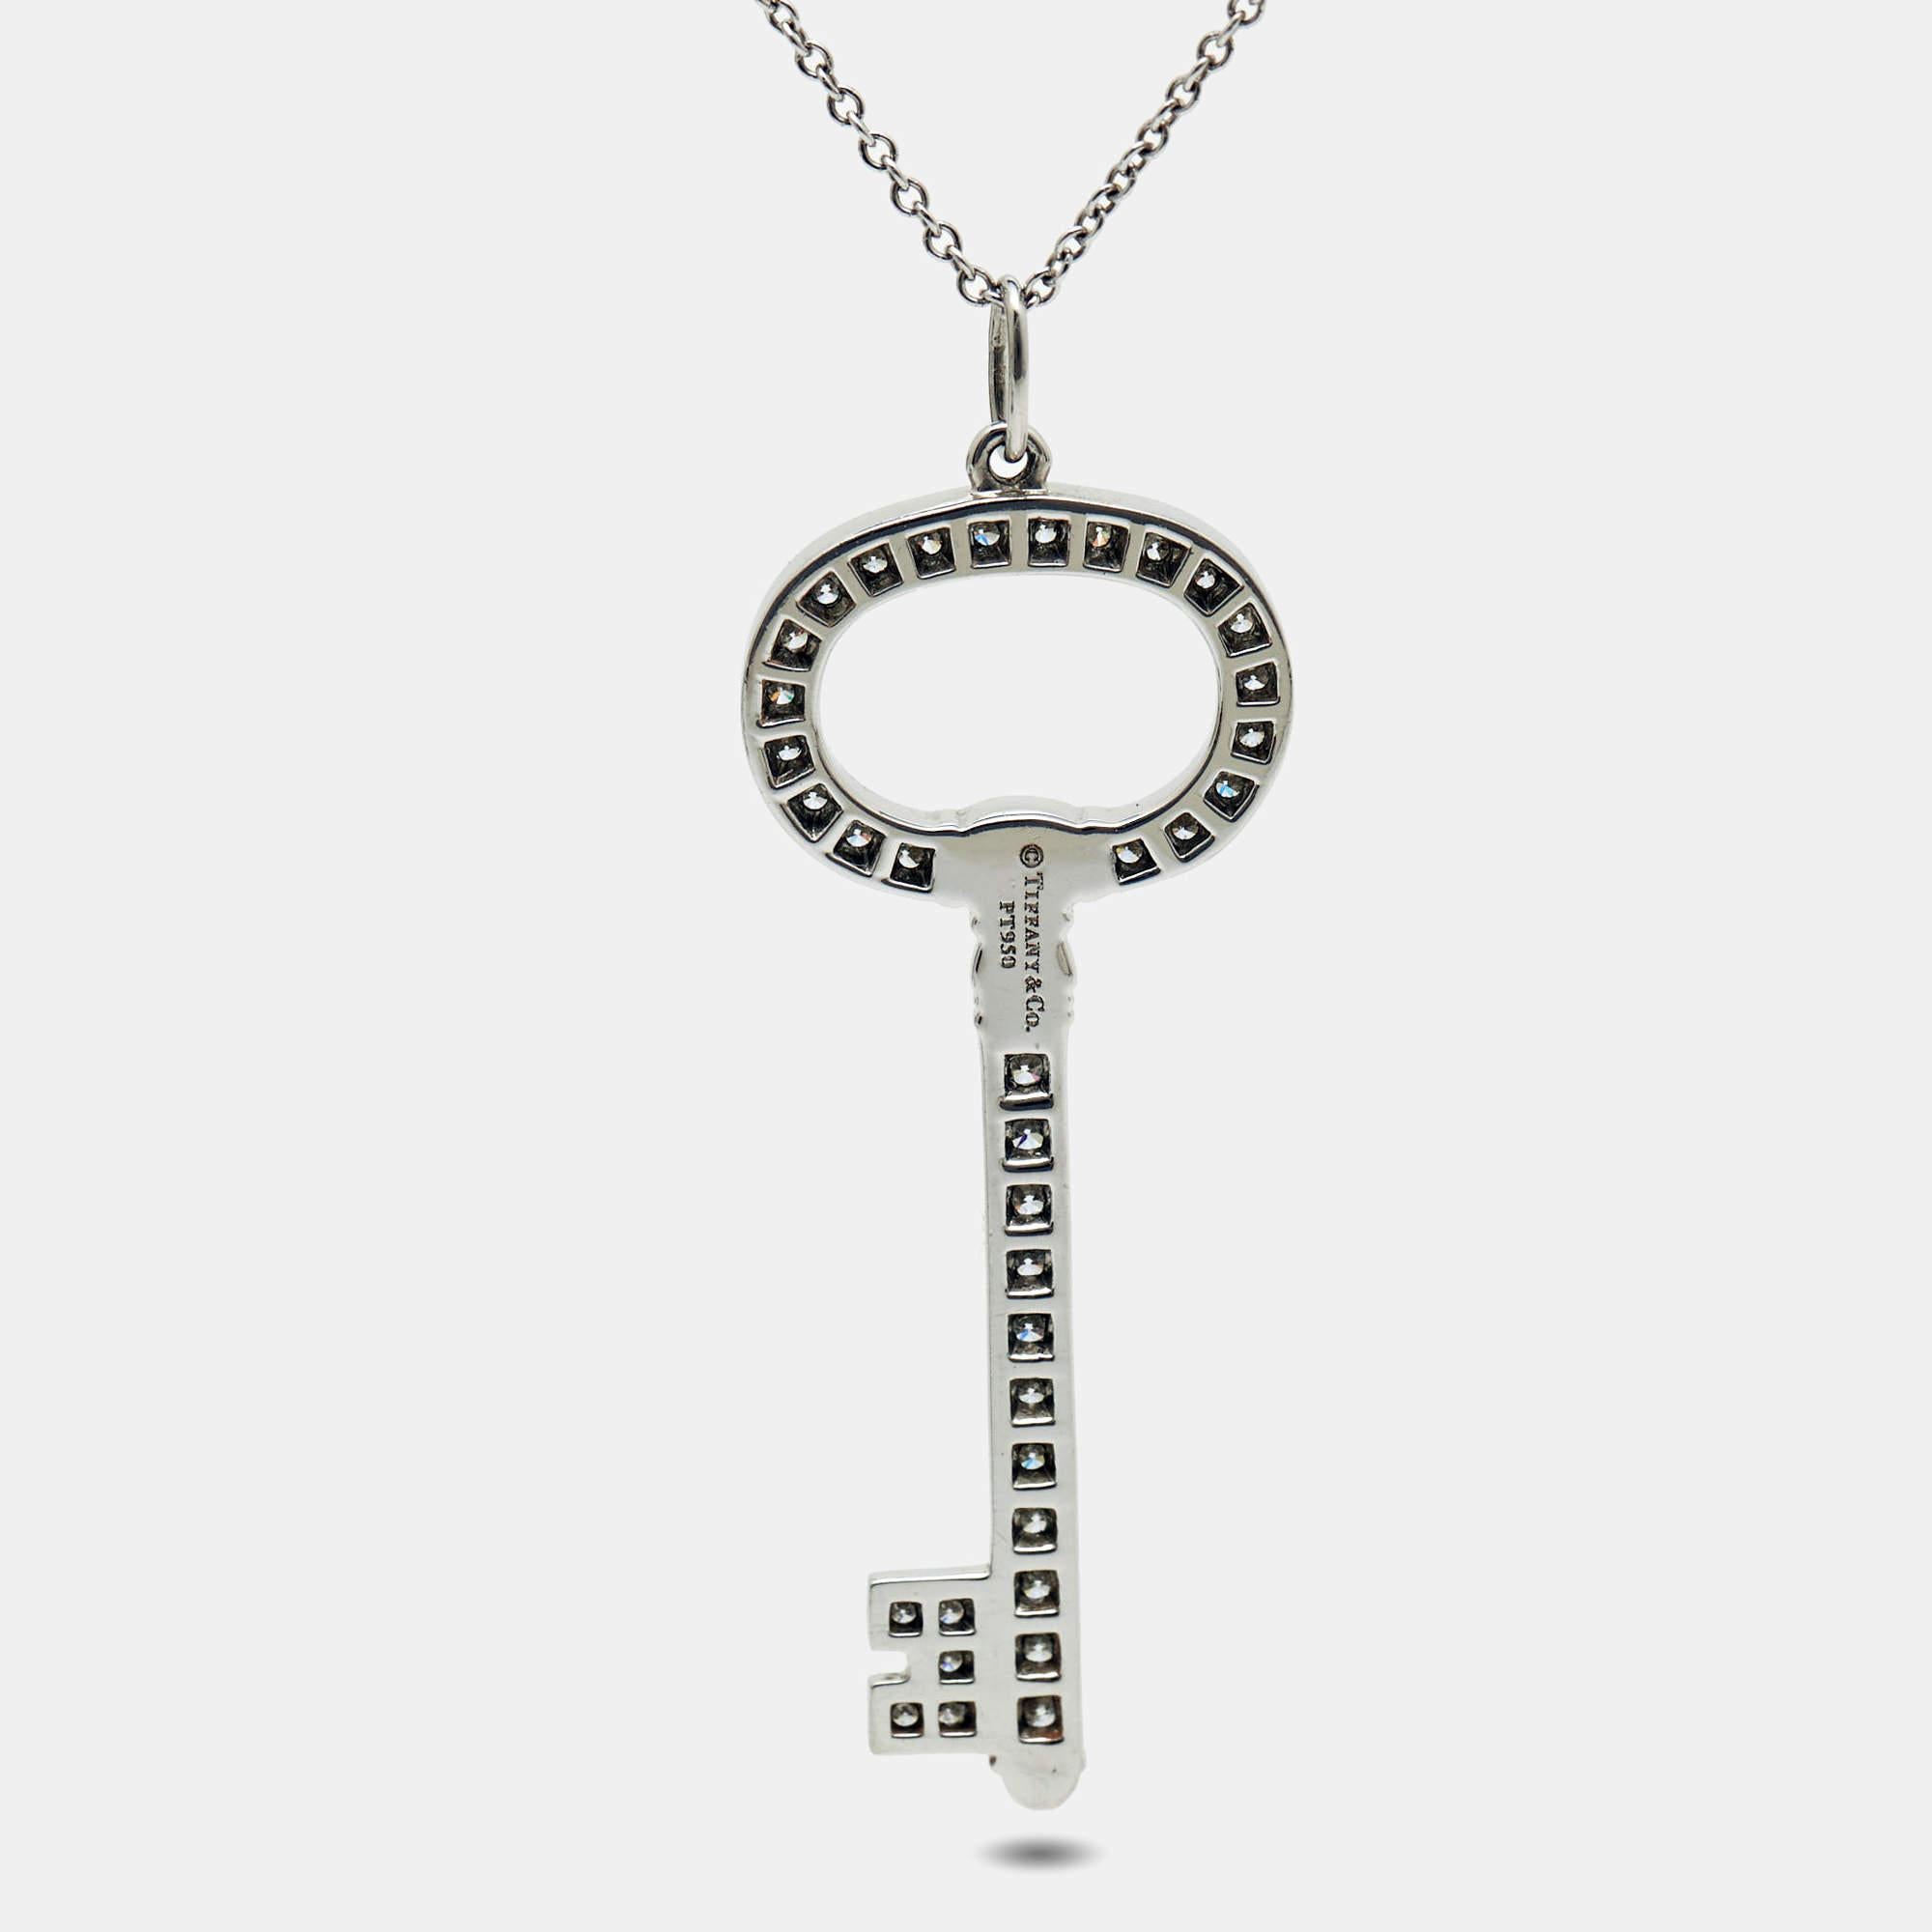 One look at this beauty from Tiffany & Co. and you'll know why diamonds are a girl's best friend. Tiffany and Co. carries the reputation of excellent craftsmanship and exquisite creativity when it comes to jewelry, and this gorgeous Key pendant in